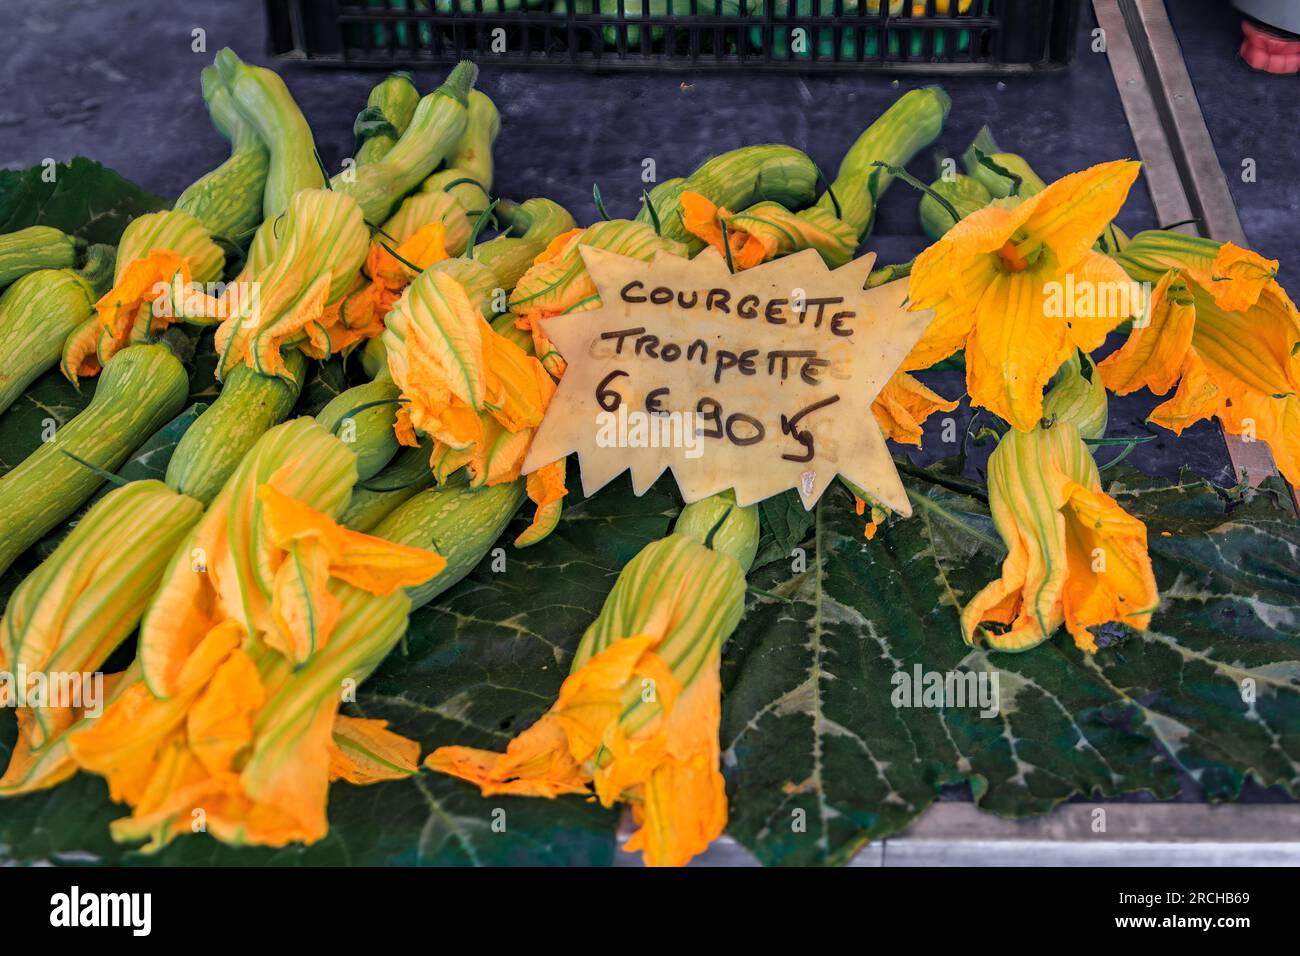 Traditional delicacy from South of France courgette or zucchini flowers at an outdoor farmers market Cours Saleya in the Old Town Nice, French Riviera Stock Photo